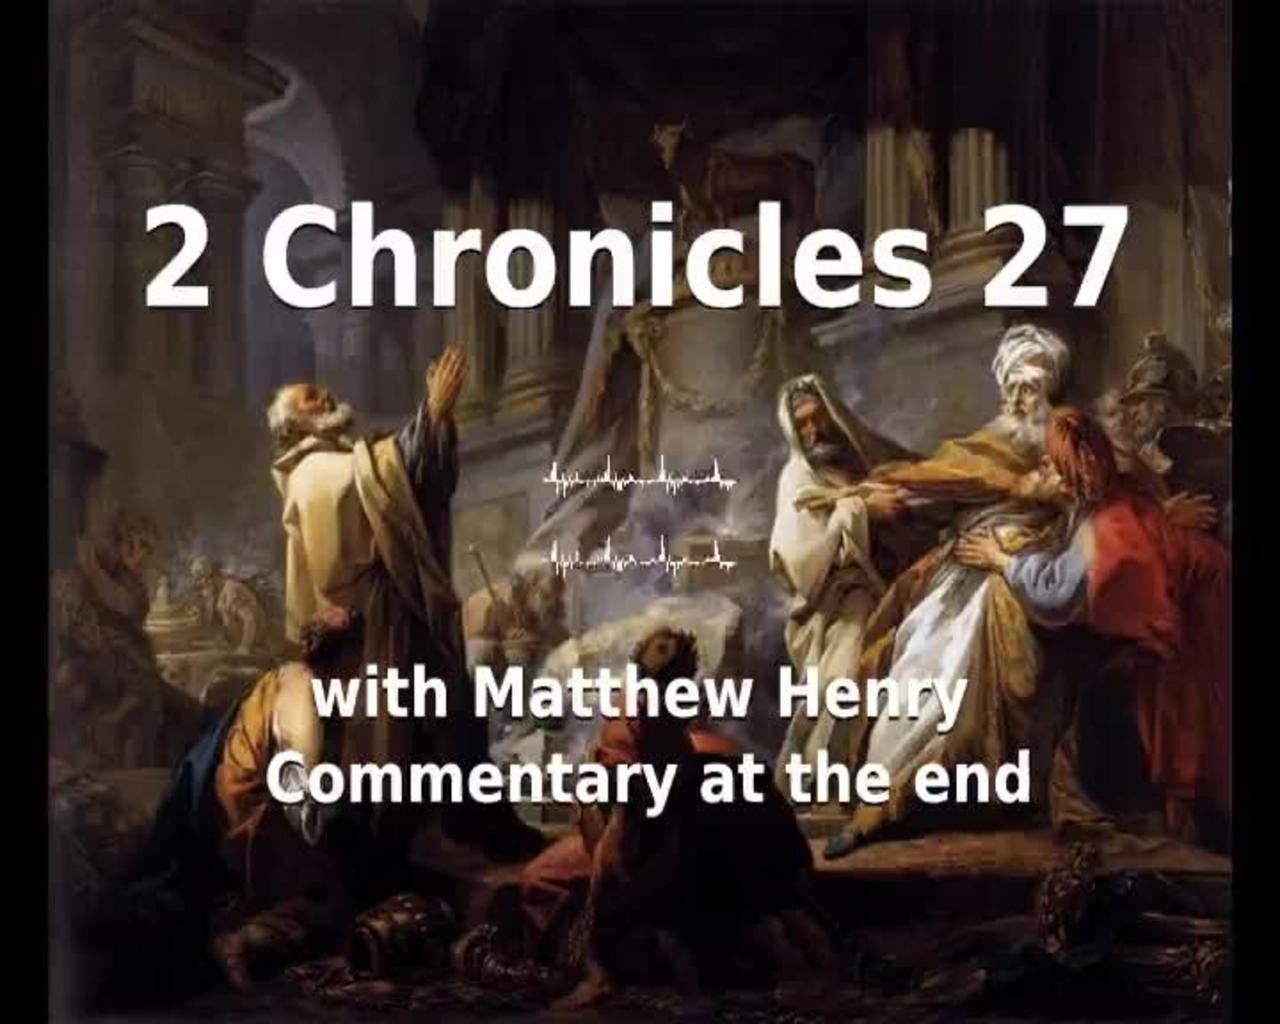 📖🕯 Holy Bible - 2 Chronicles 27 with Matthew Henry Commentary at the end.